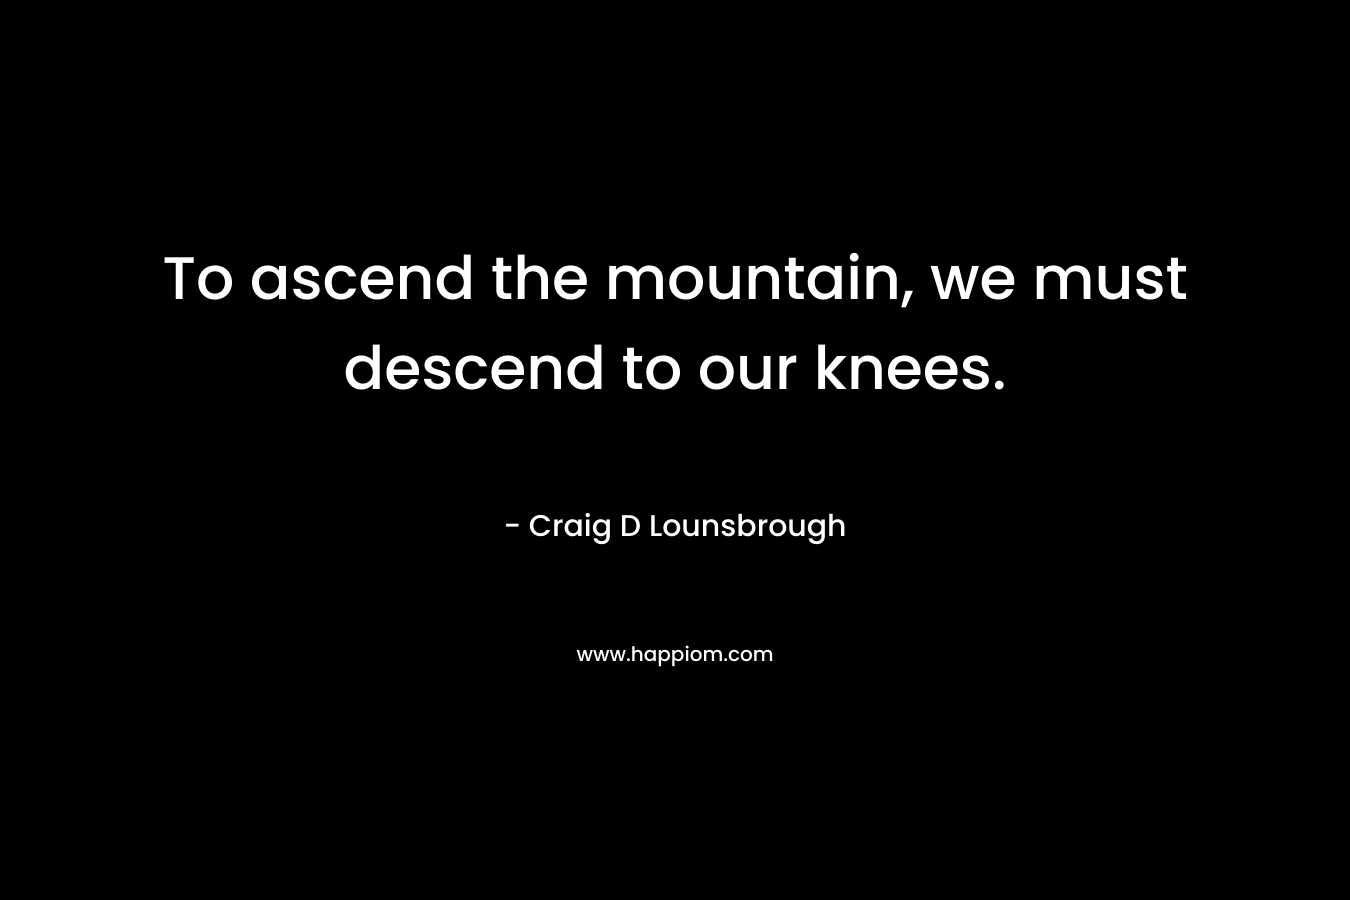 To ascend the mountain, we must descend to our knees. – Craig D Lounsbrough